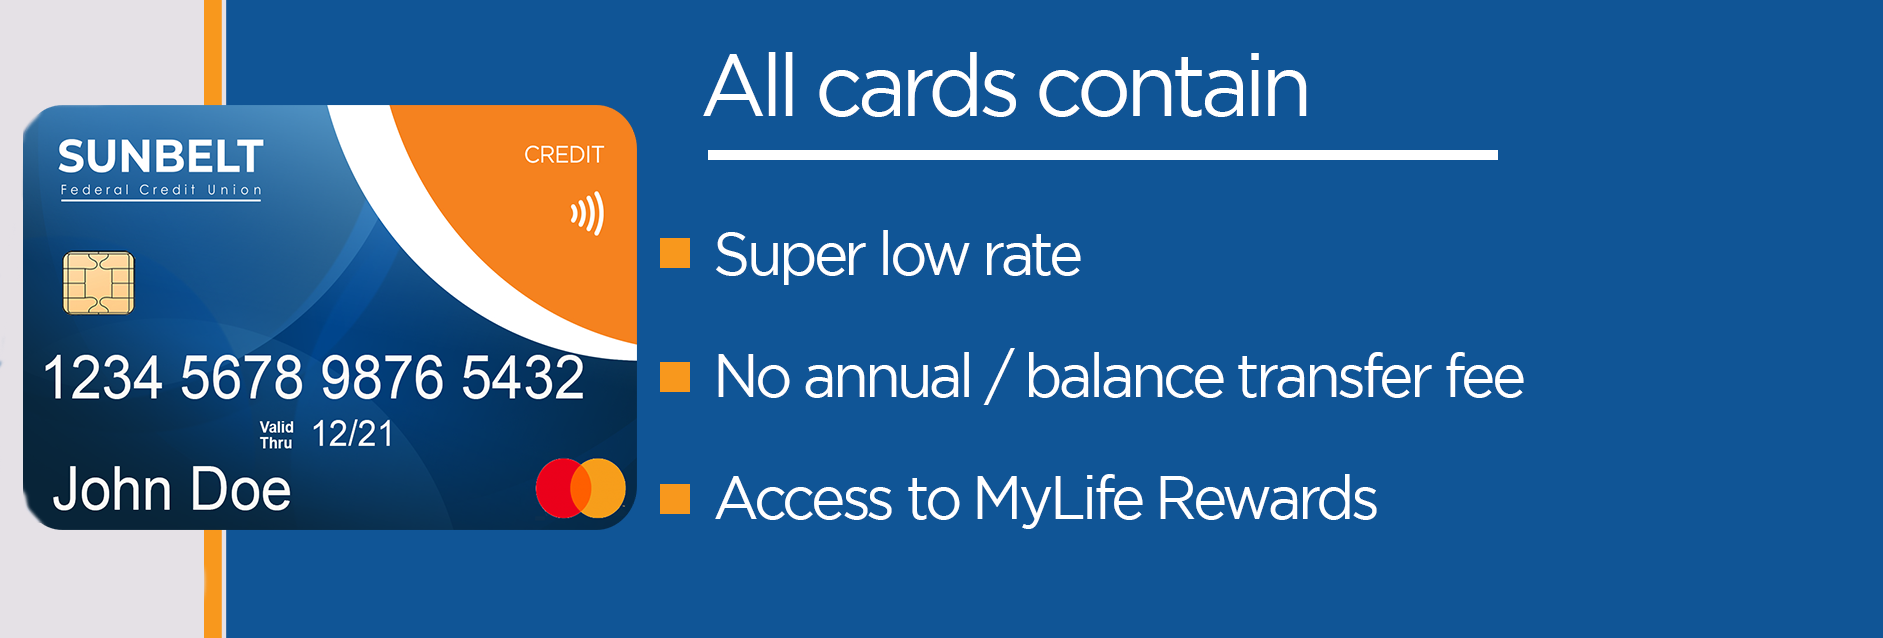 Get a super low credit card rate, no balance fees, no annual fees, and great rewards with MyLife Rewards at Sunbelt